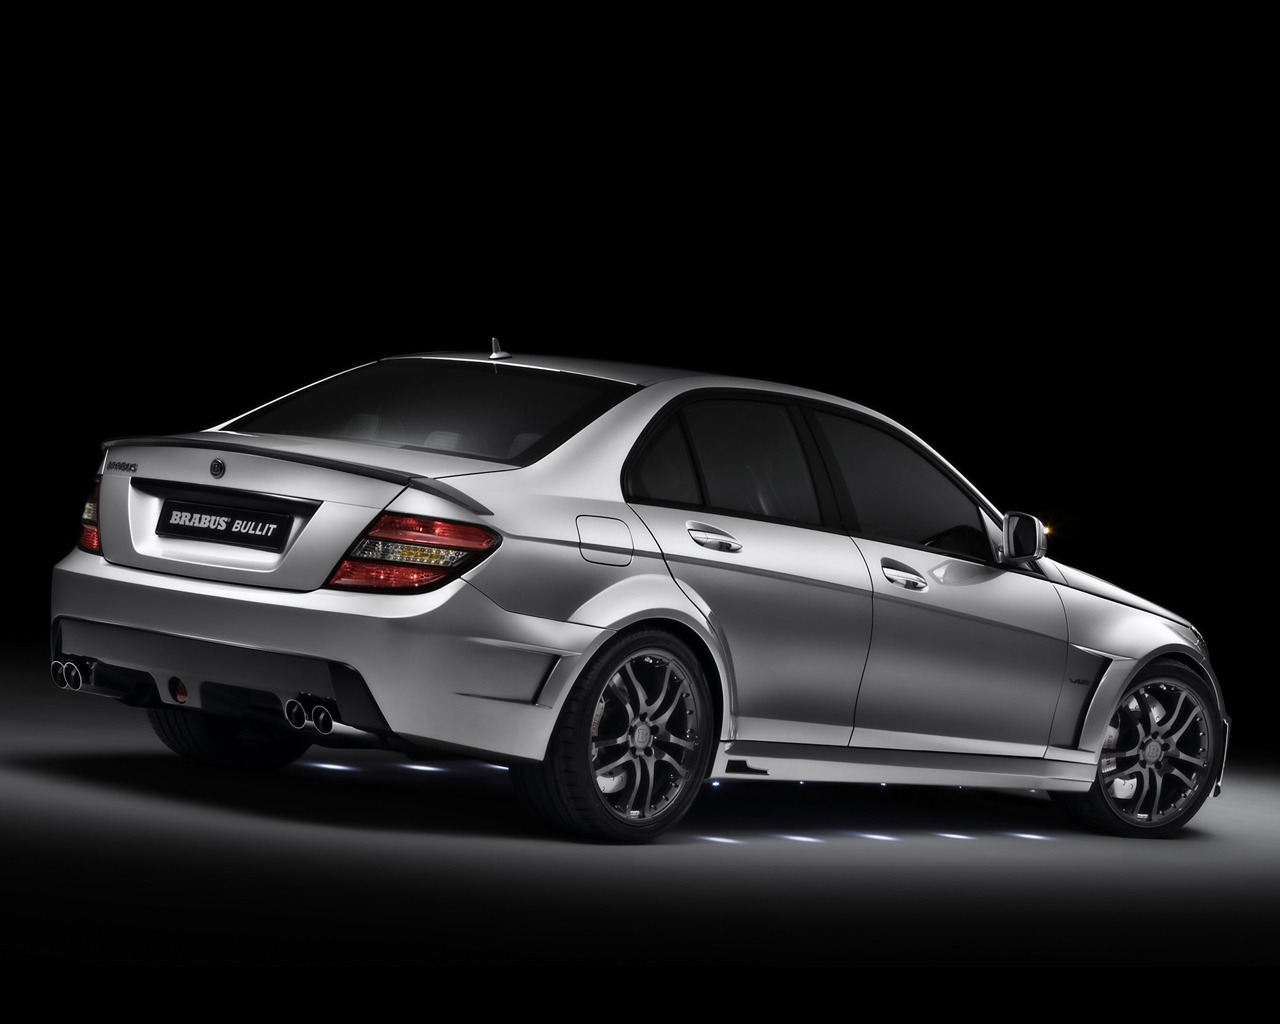 Brabus Mercedes C Class Wallpaper Mercedes Cars Wallpapers In Jpg Format For Free Download